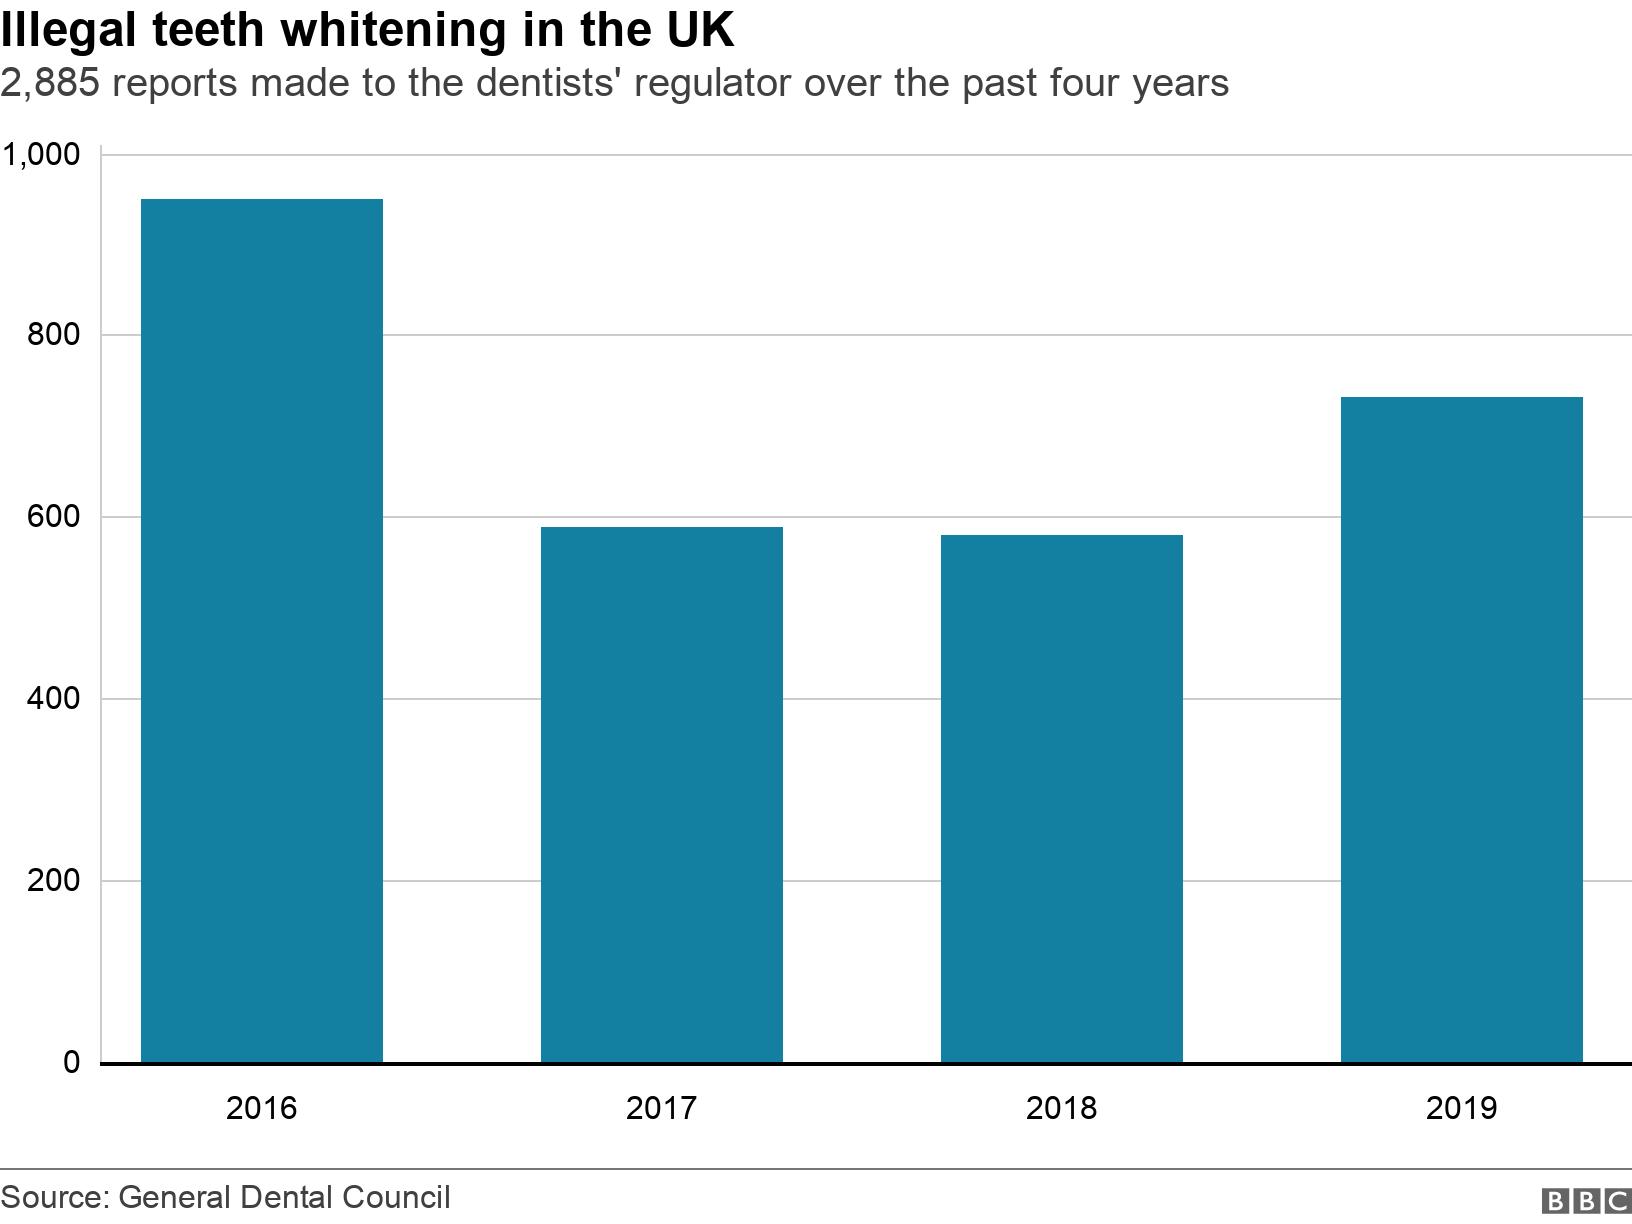 Illegal teeth whitening in the UK. 2,885 reports made to the dentists' regulator over the past four years. The bar chart shows 951 reports of teeth whitening in  2016, followed by 590 reports of teeth whitening in  2017, then 582 reports of teeth whitening in  2018 and 732 reports of teeth whitening in  2019 .